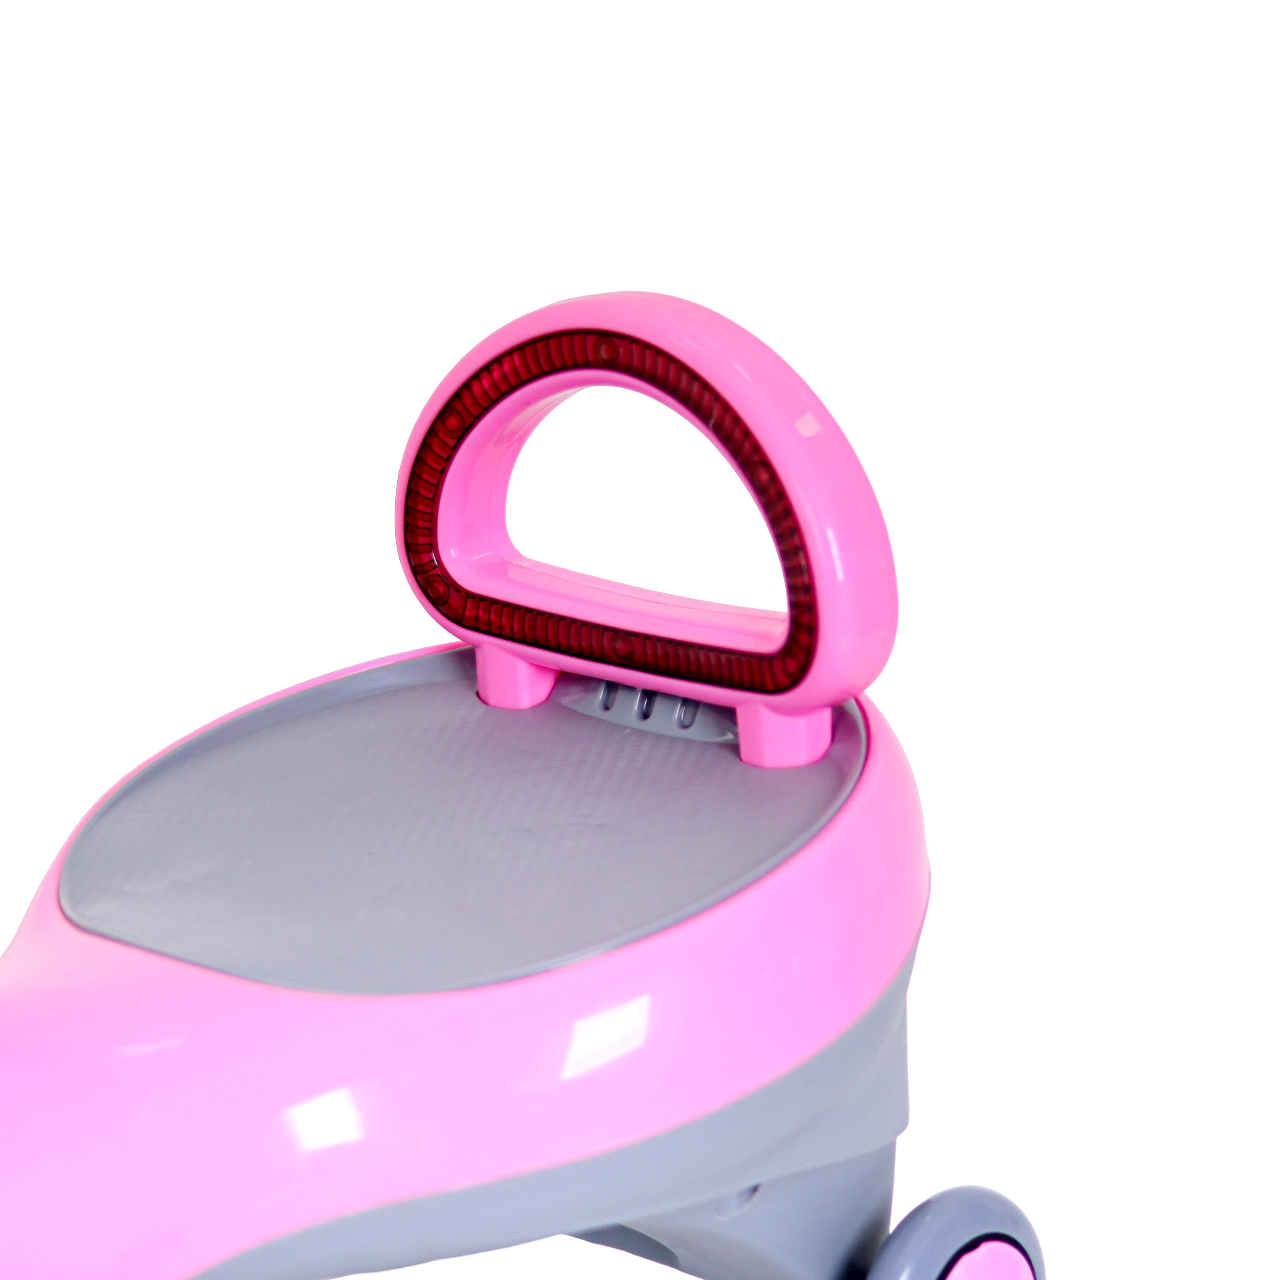 Luusa Twister Backlight : The Ultimate Ride-On Toy for Kids Aged 2-8 Years with Music and Lights